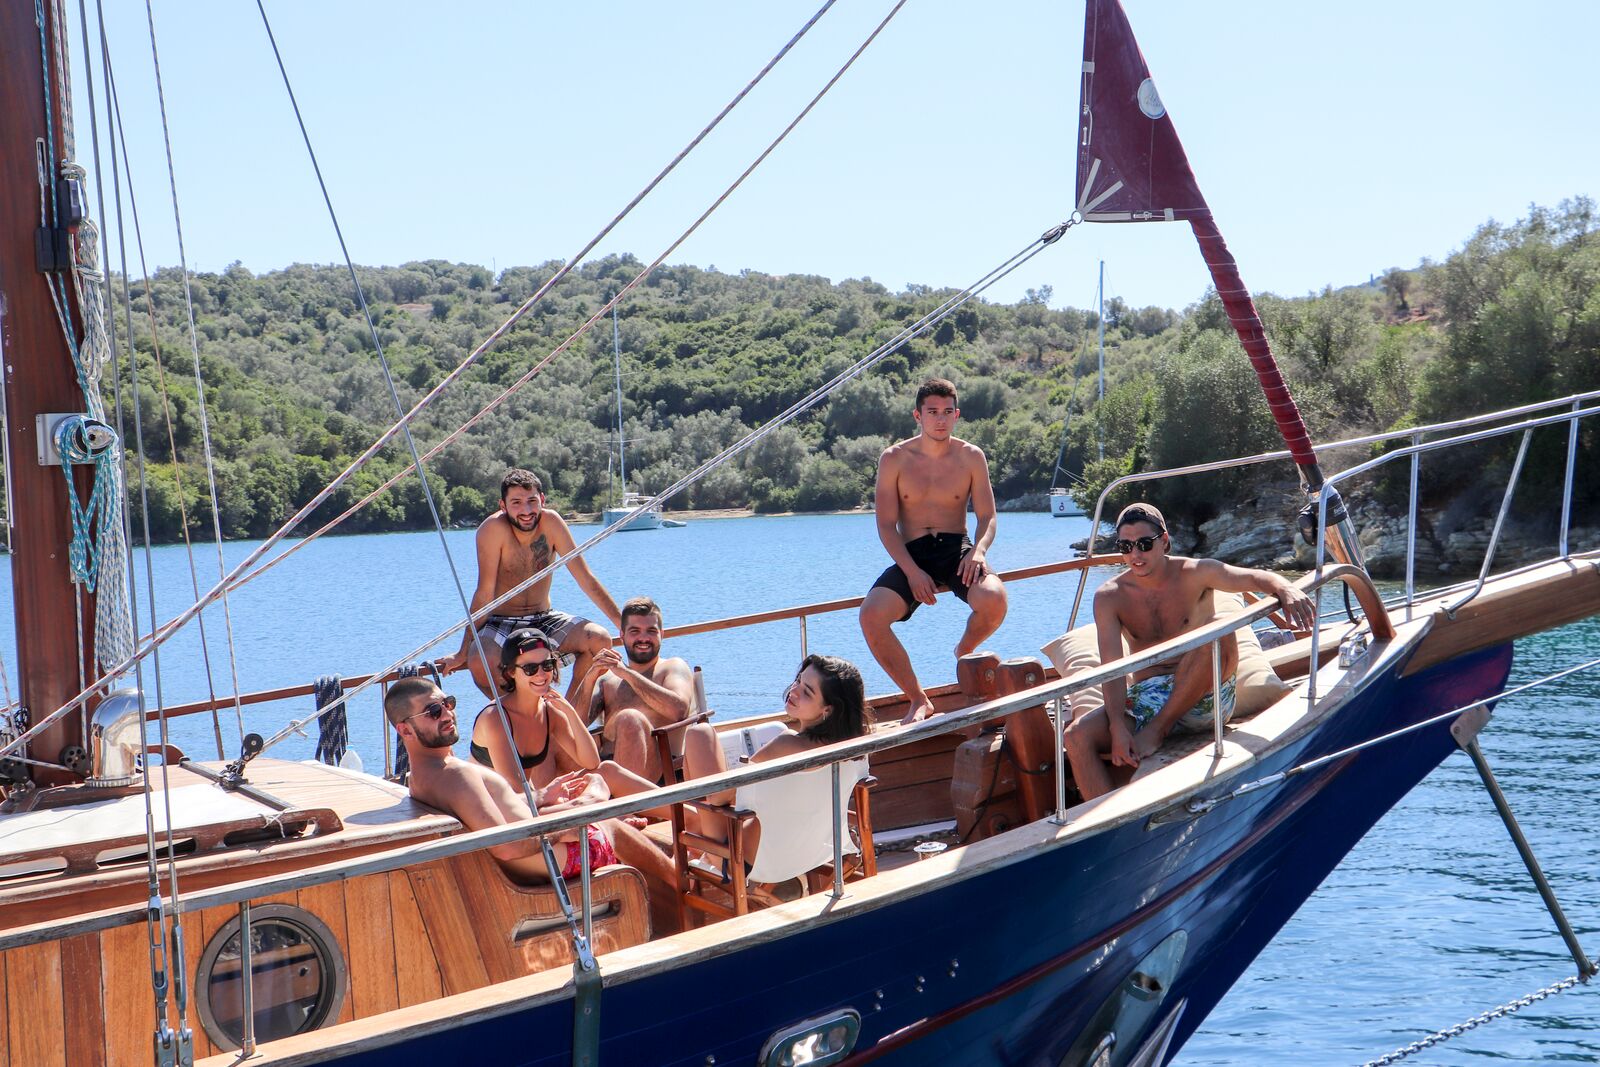 Full day sailing tour in Corfu with lunch Cover